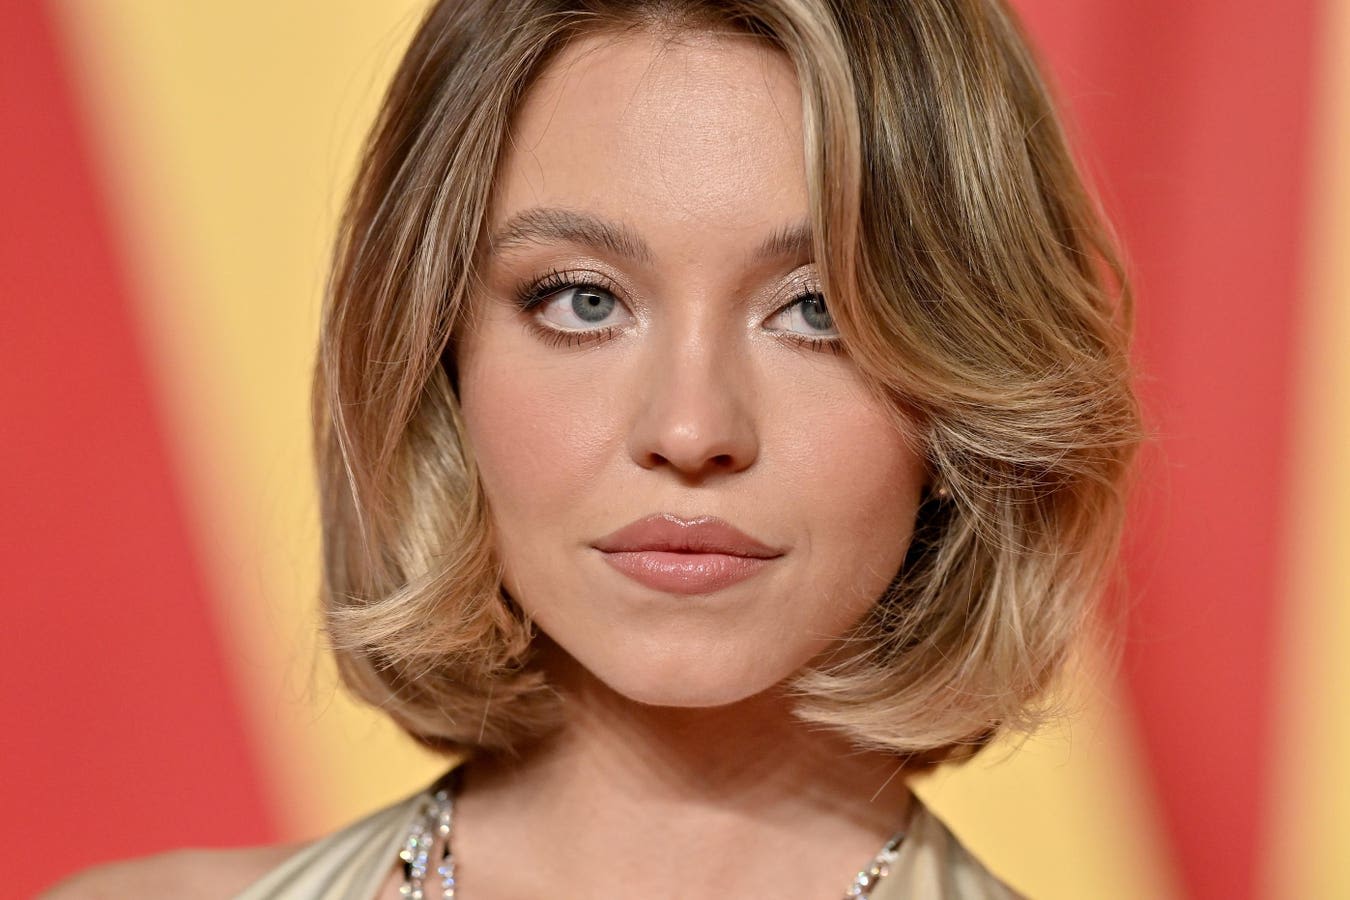 Sydney Sweeney’s Reaction To AI-Generated Portrait Goes Viral